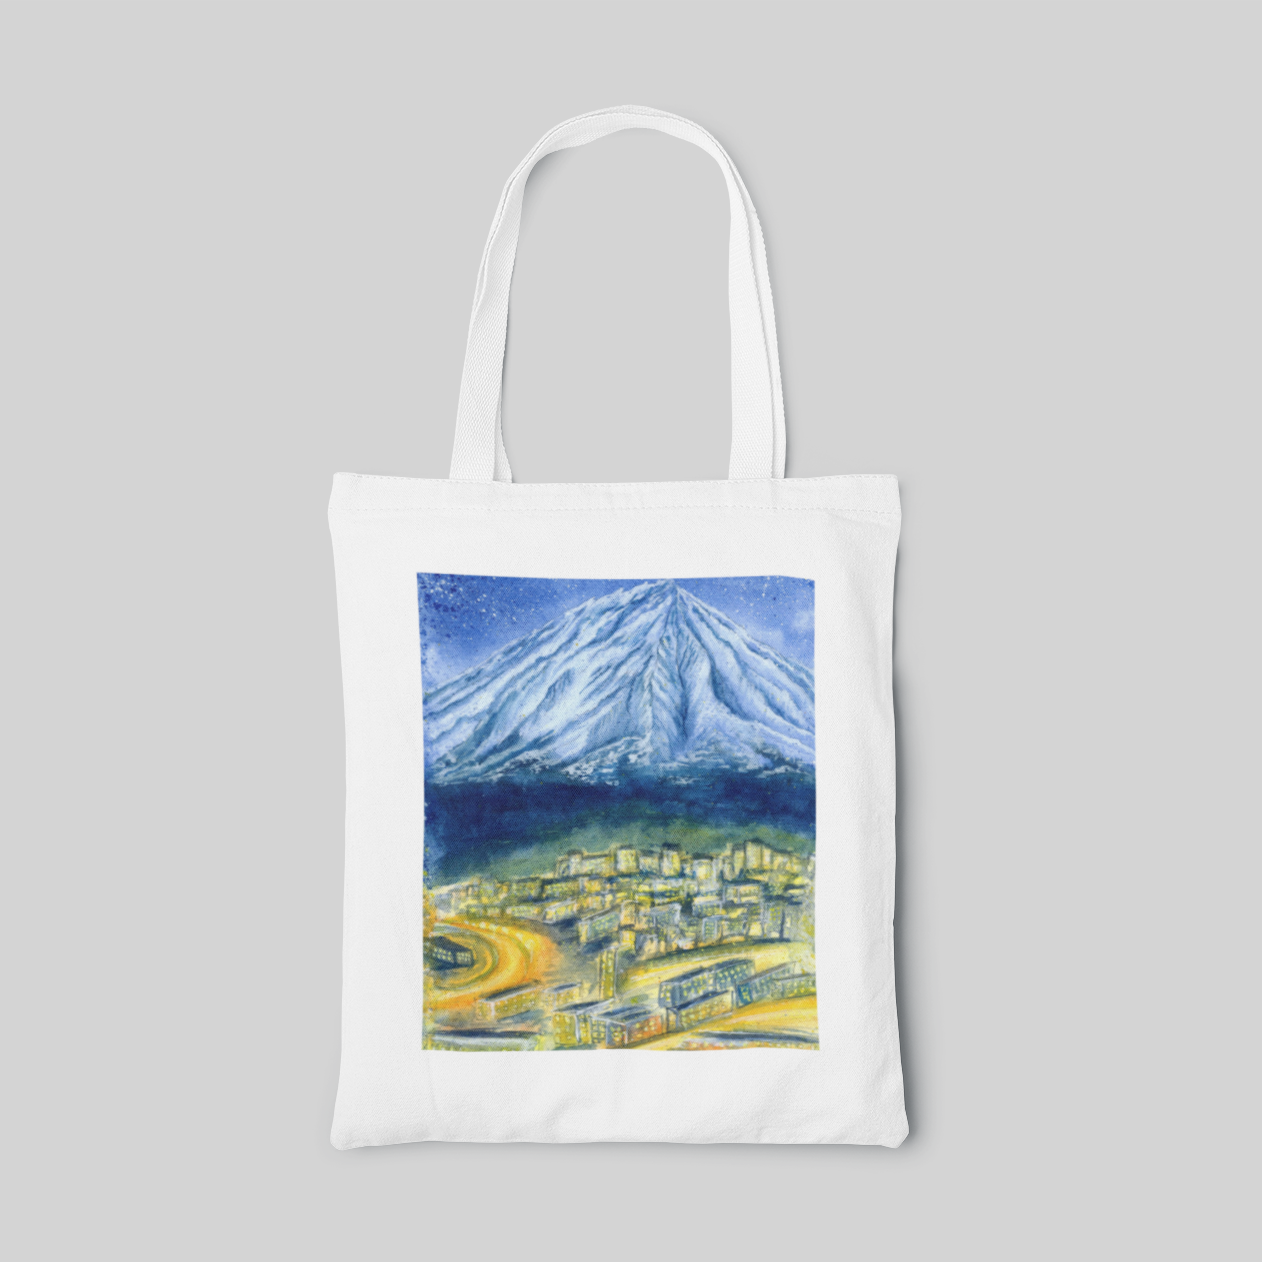 White nature designed tote bag with blue volcano landscape above yellow village, front side